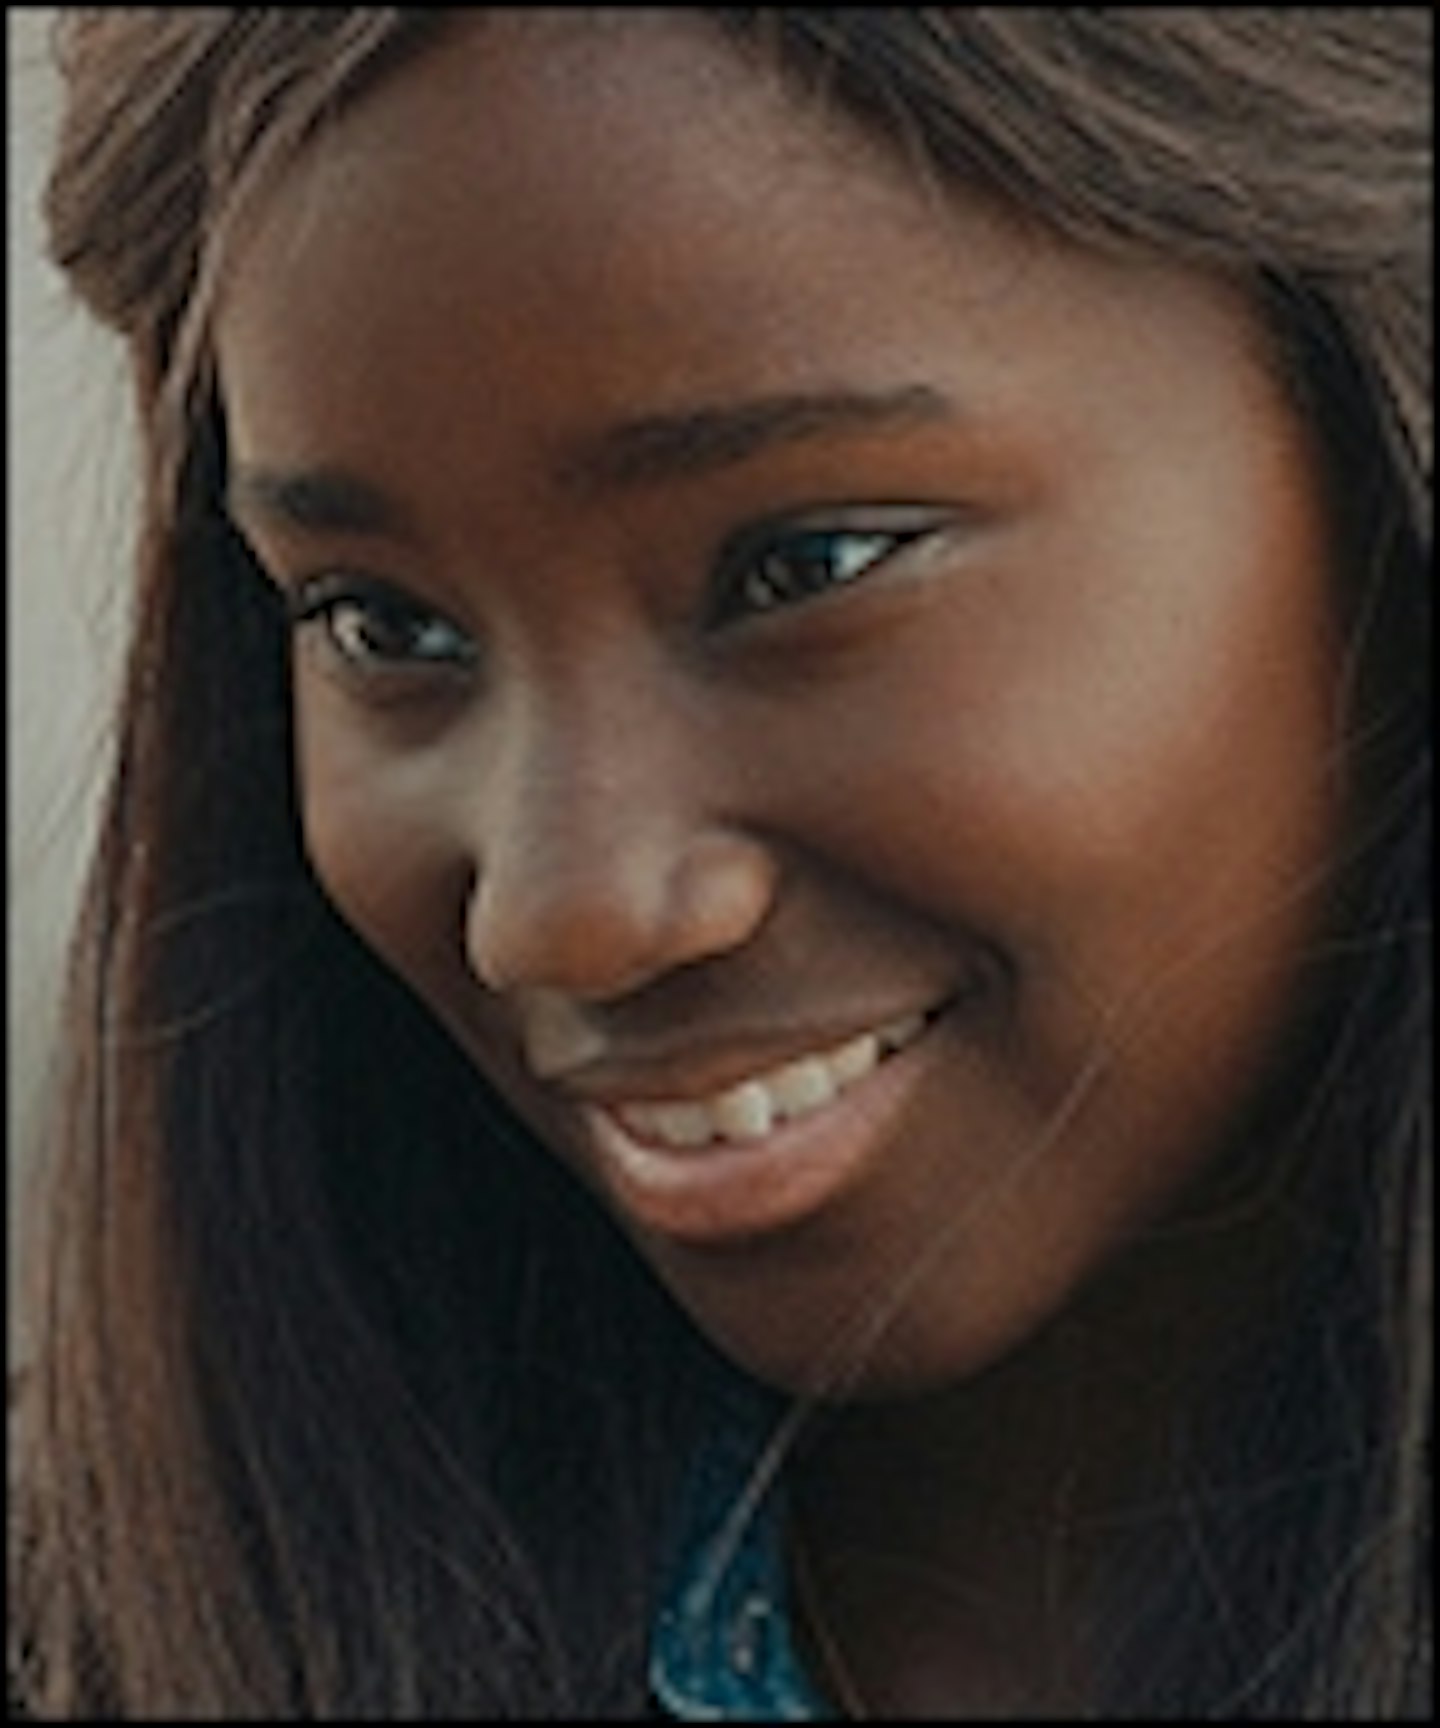 Dance-Fuelled Clip From Girlhood 